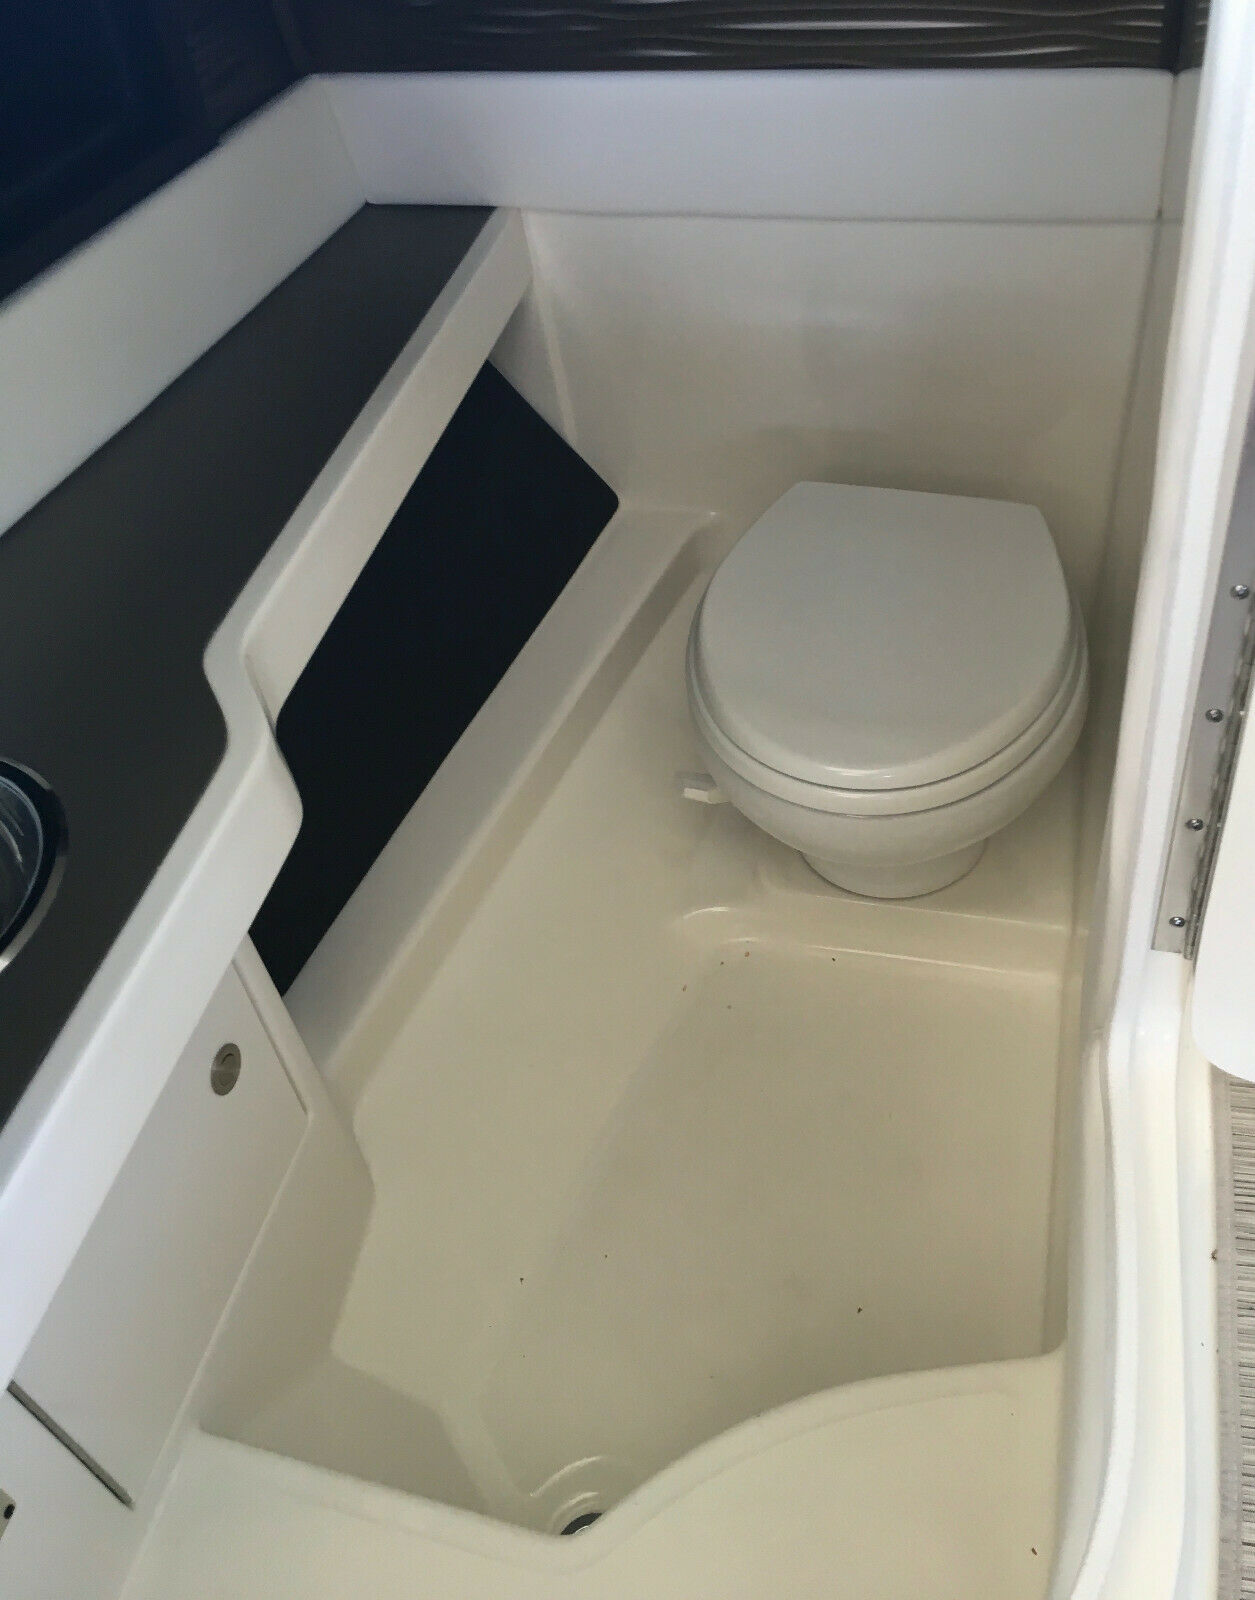 Sea Ray SLX 310 2017 for sale for $150,000 - Boats-from-USA.com